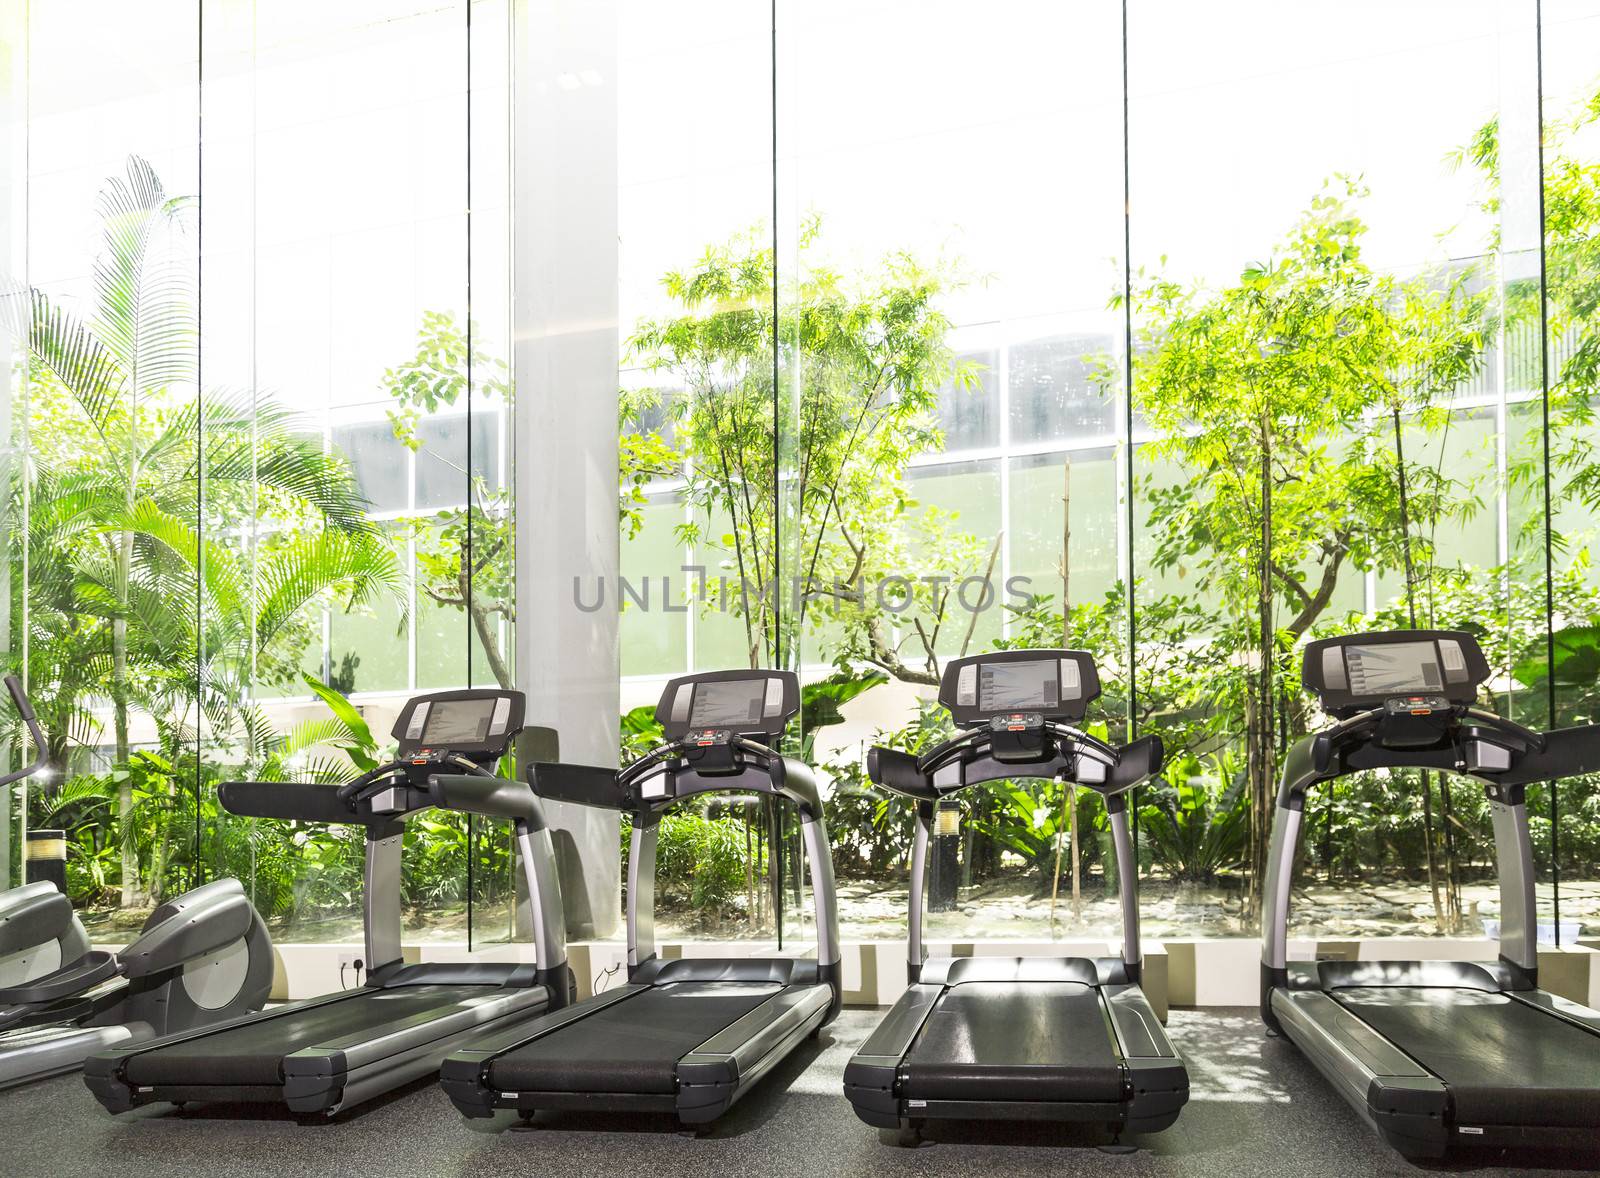 Four Treadmill in a gym with high ceiling in front of a big glass window